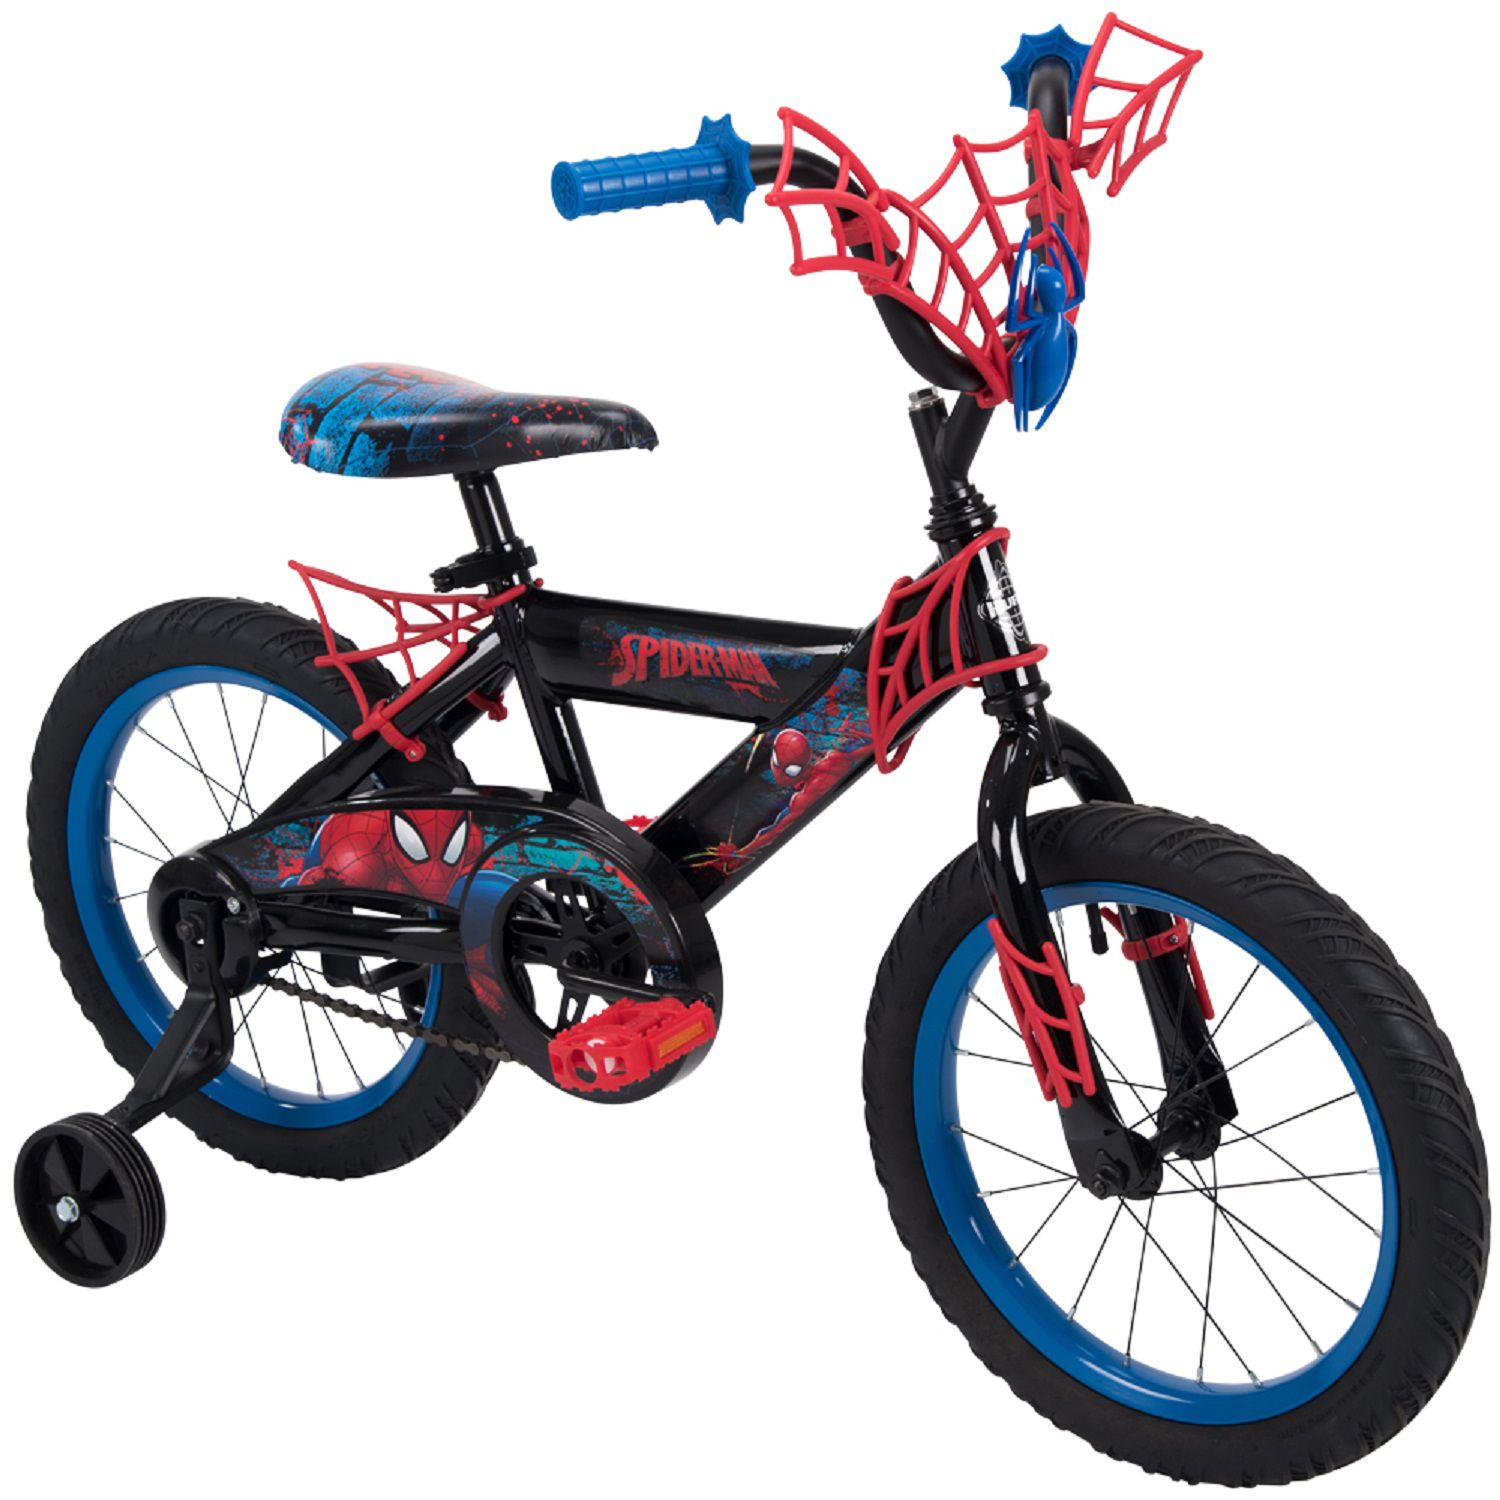 16 inch bicycle for boy